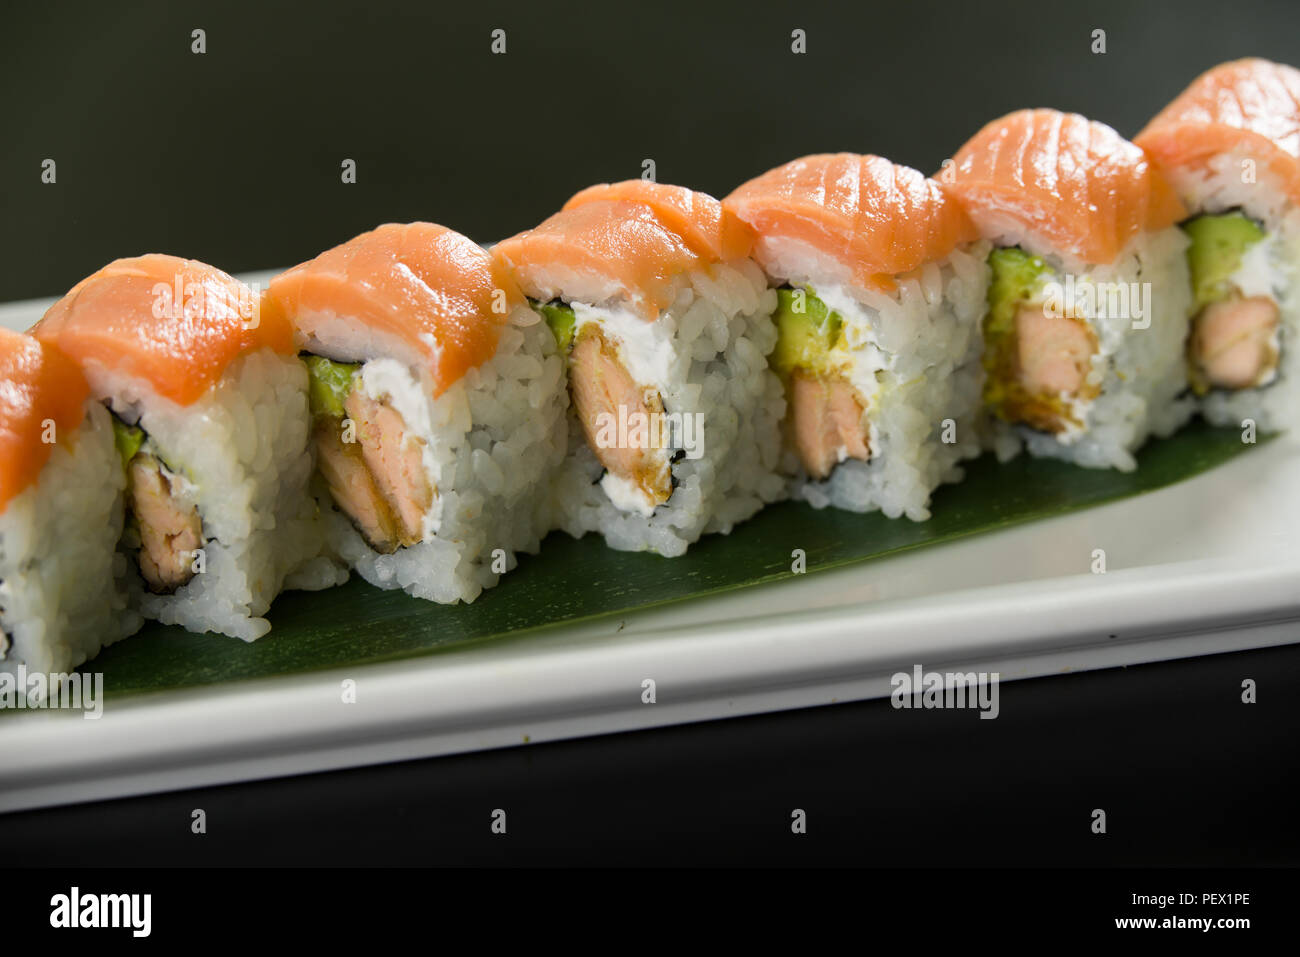 Sushi on a white plate Banque D'Images